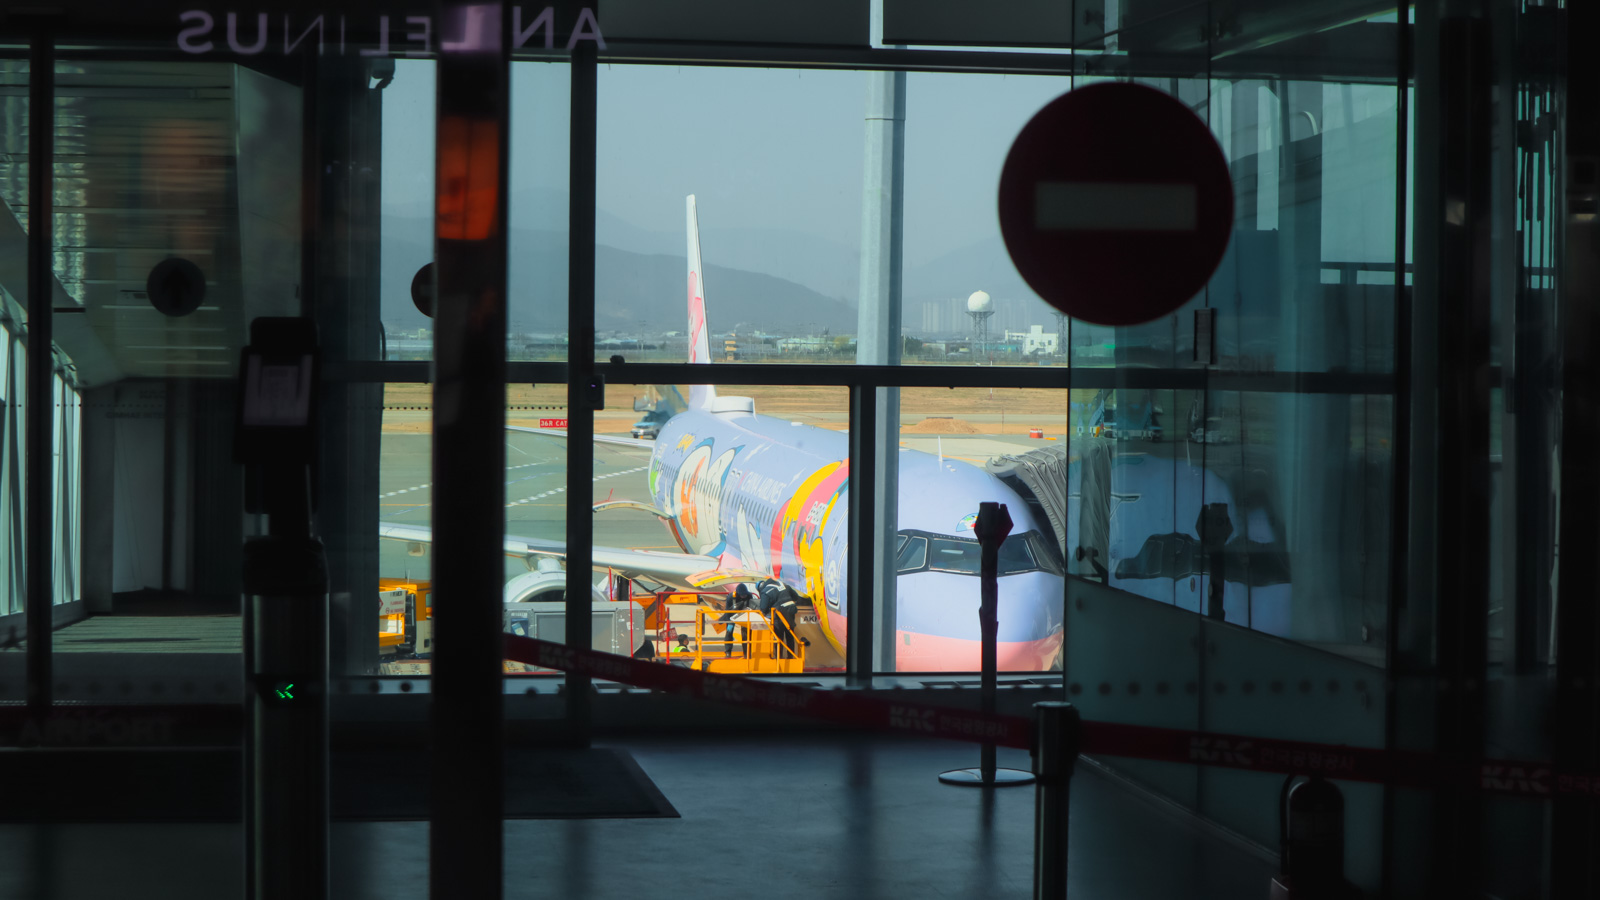 China Airlines A321neo Pikachu plane at Gimhae International Airport, South Korea